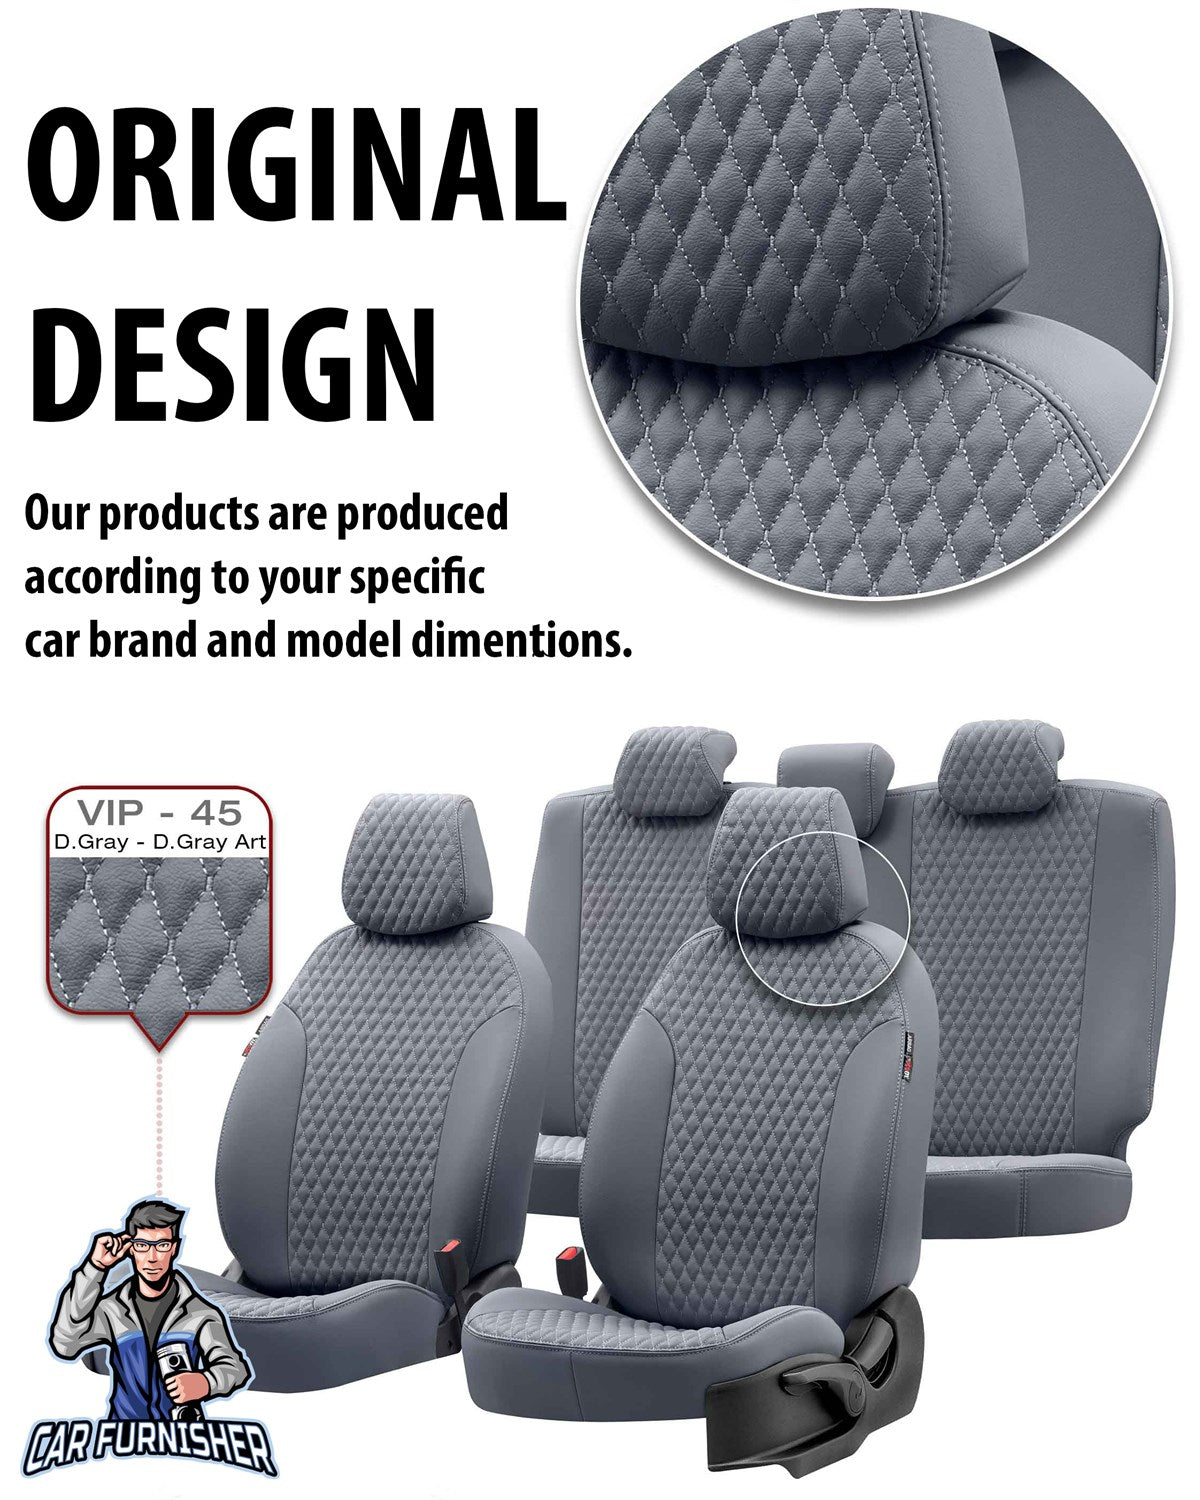 Toyota Hilux Seat Cover Amsterdam Leather Design Ivory Leather